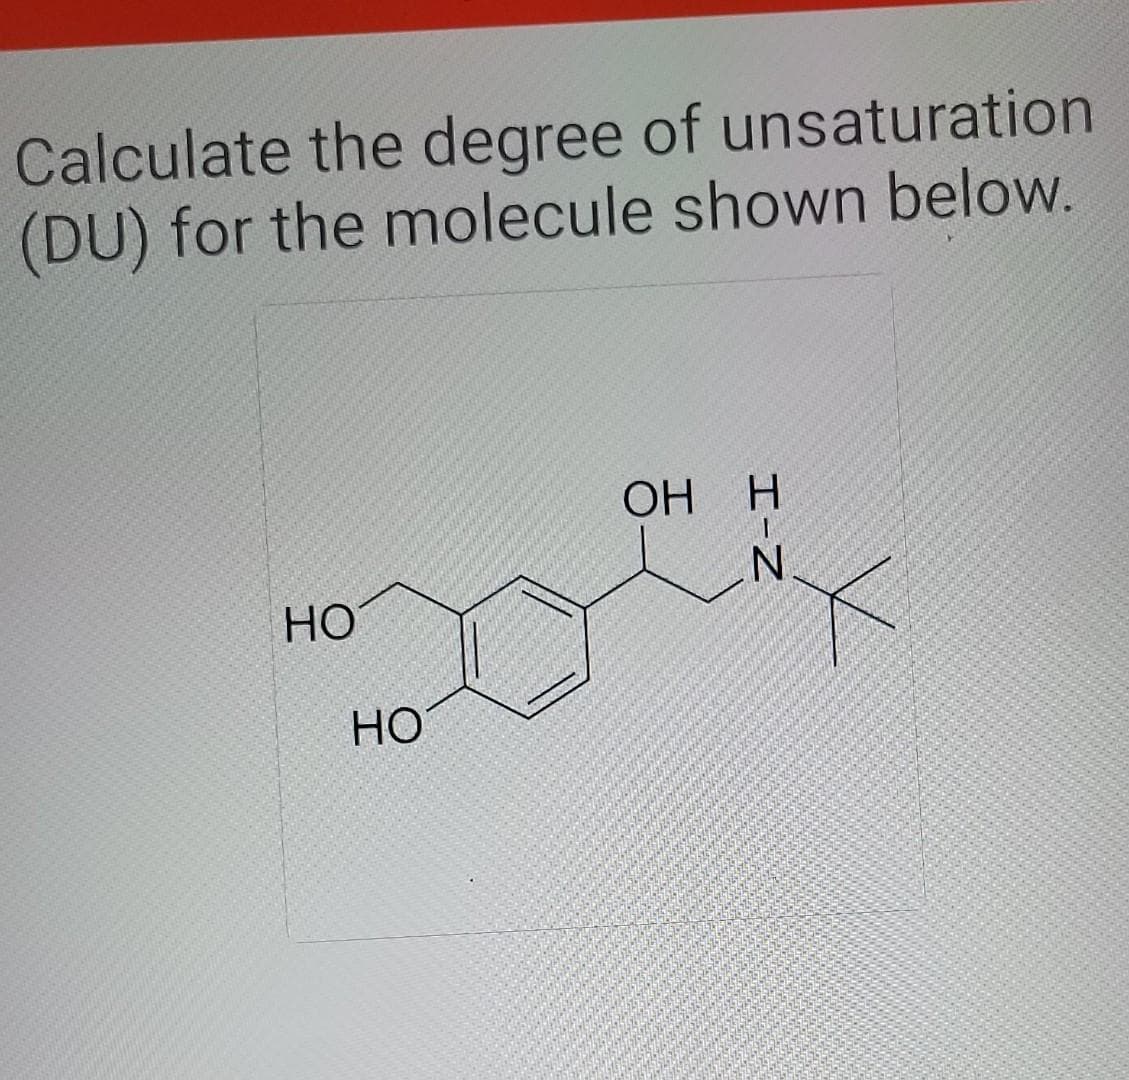 Calculate the degree of unsaturation
(DU) for the molecule shown below.
HO
HO
OH H
H-N